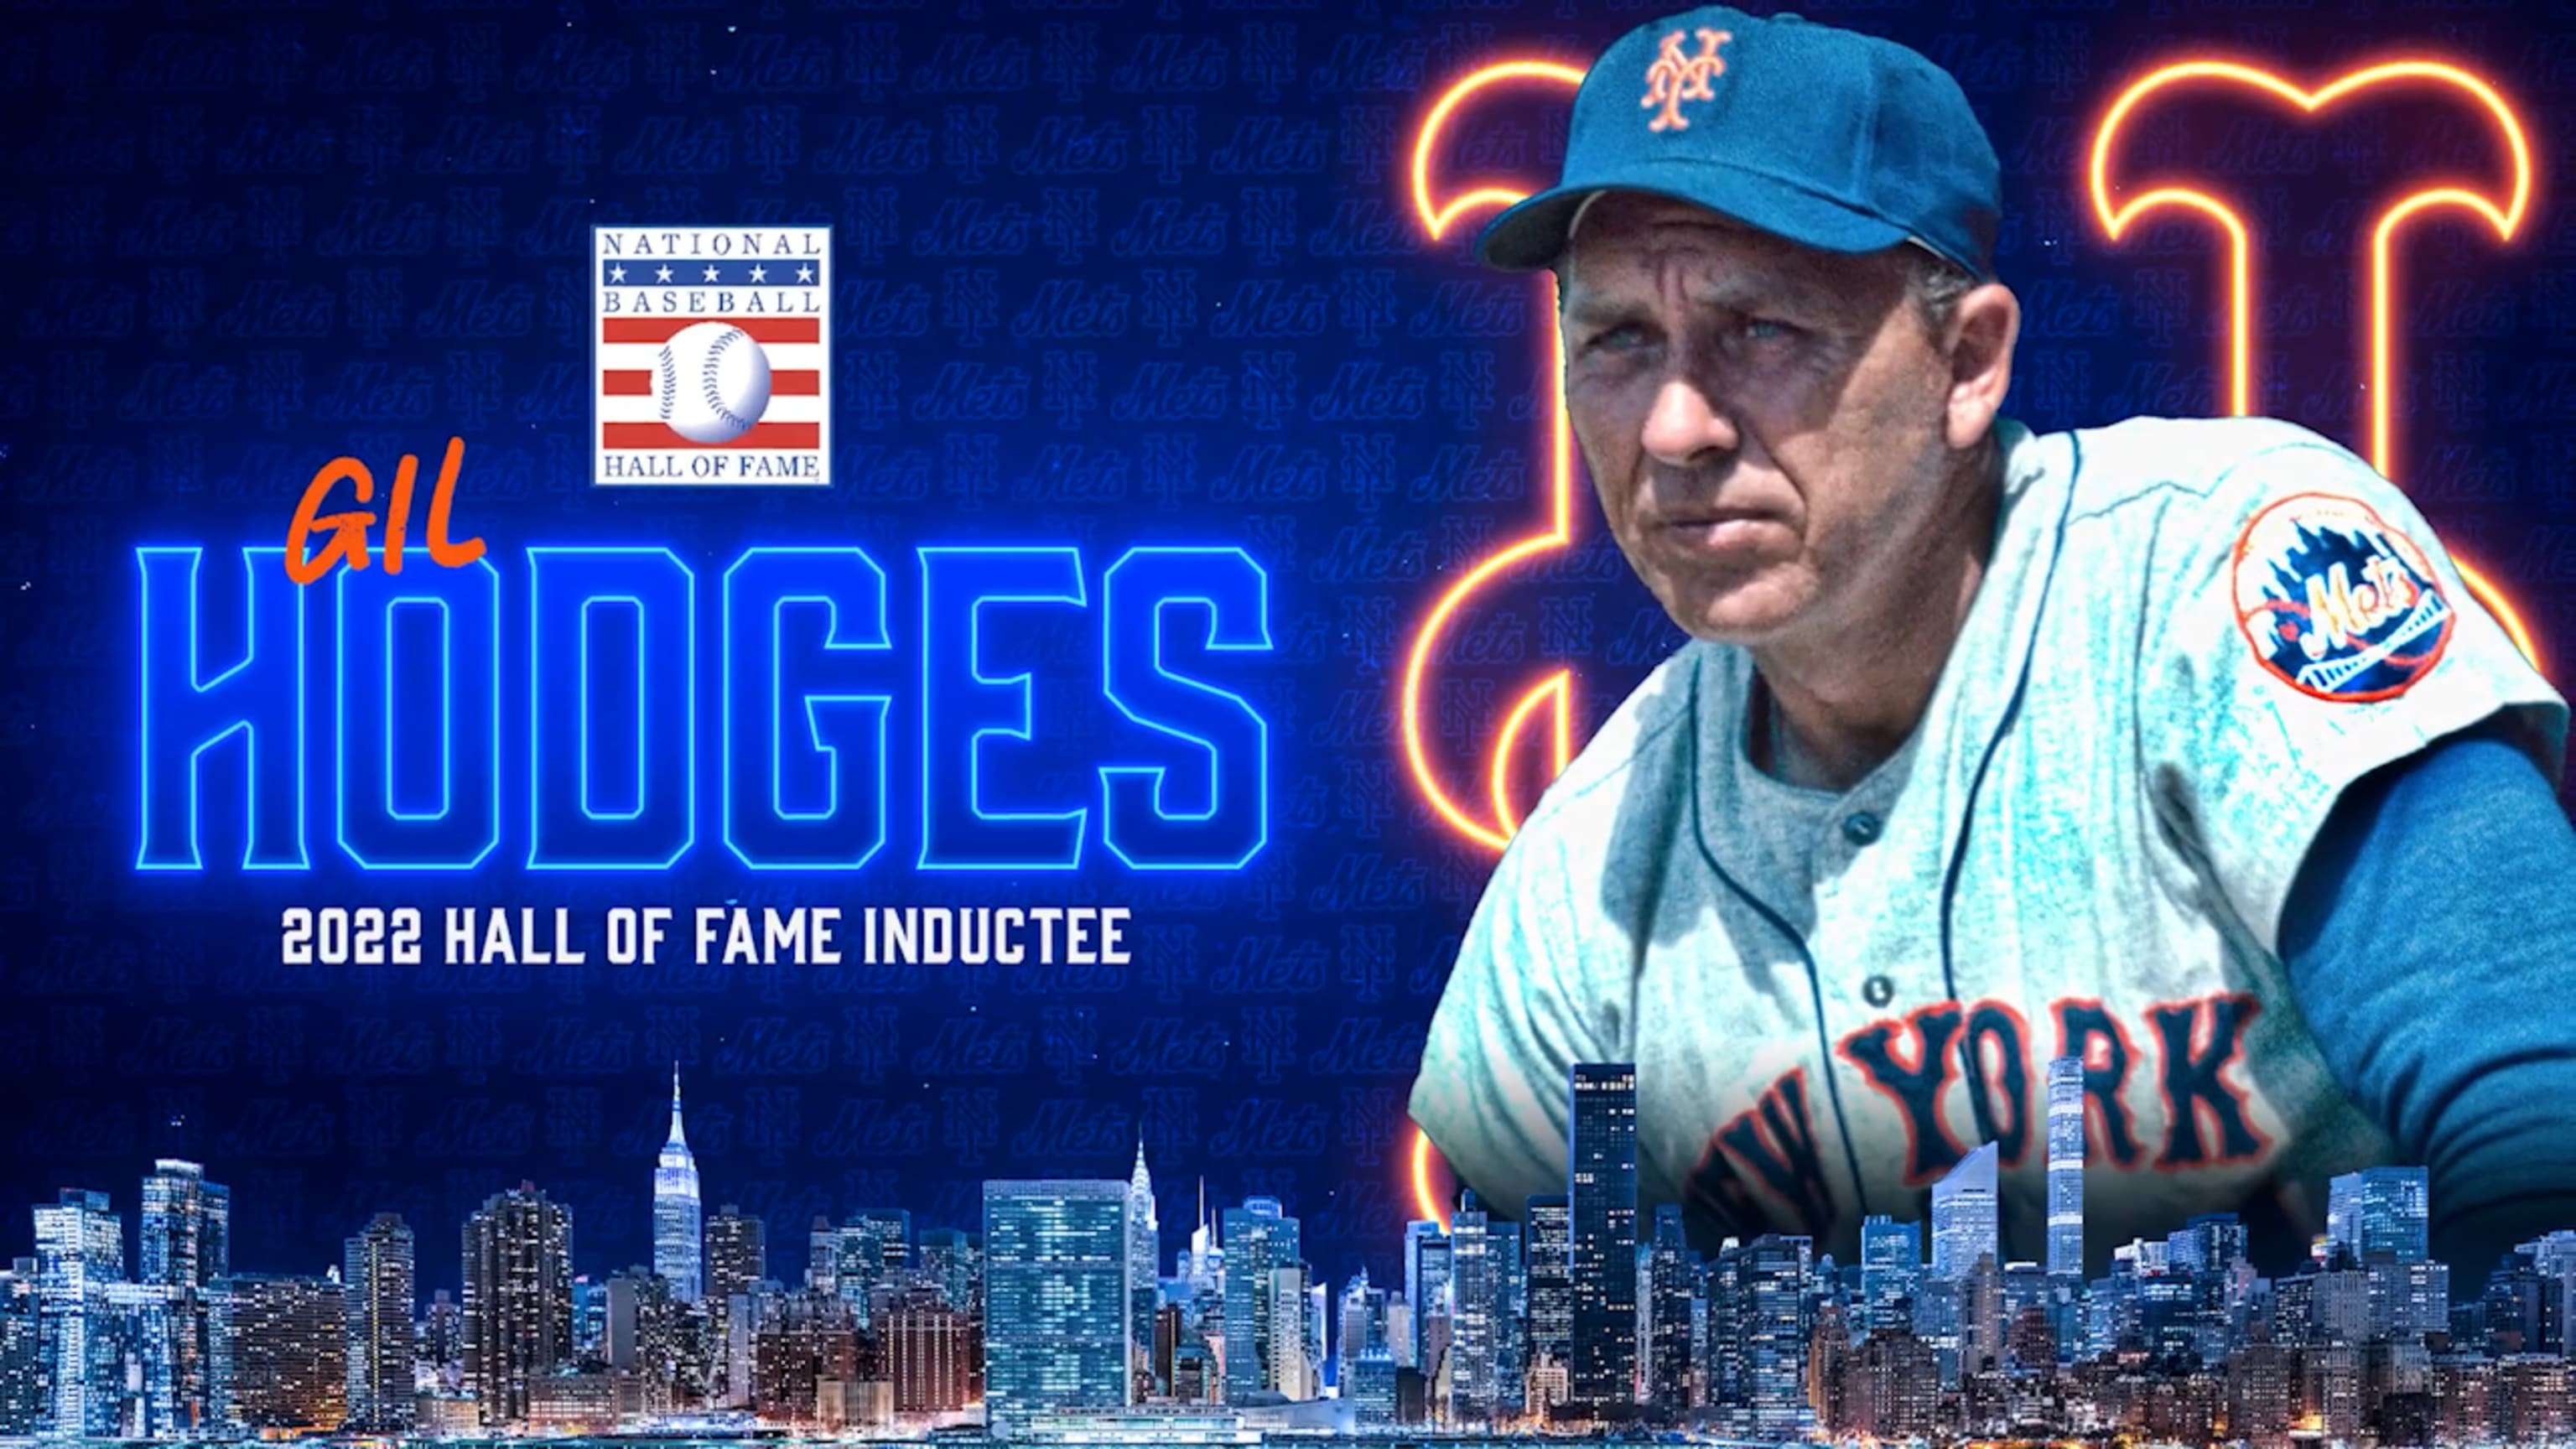 Gil Hodges voted into Baseball Hall of Fame after Catholic documentary